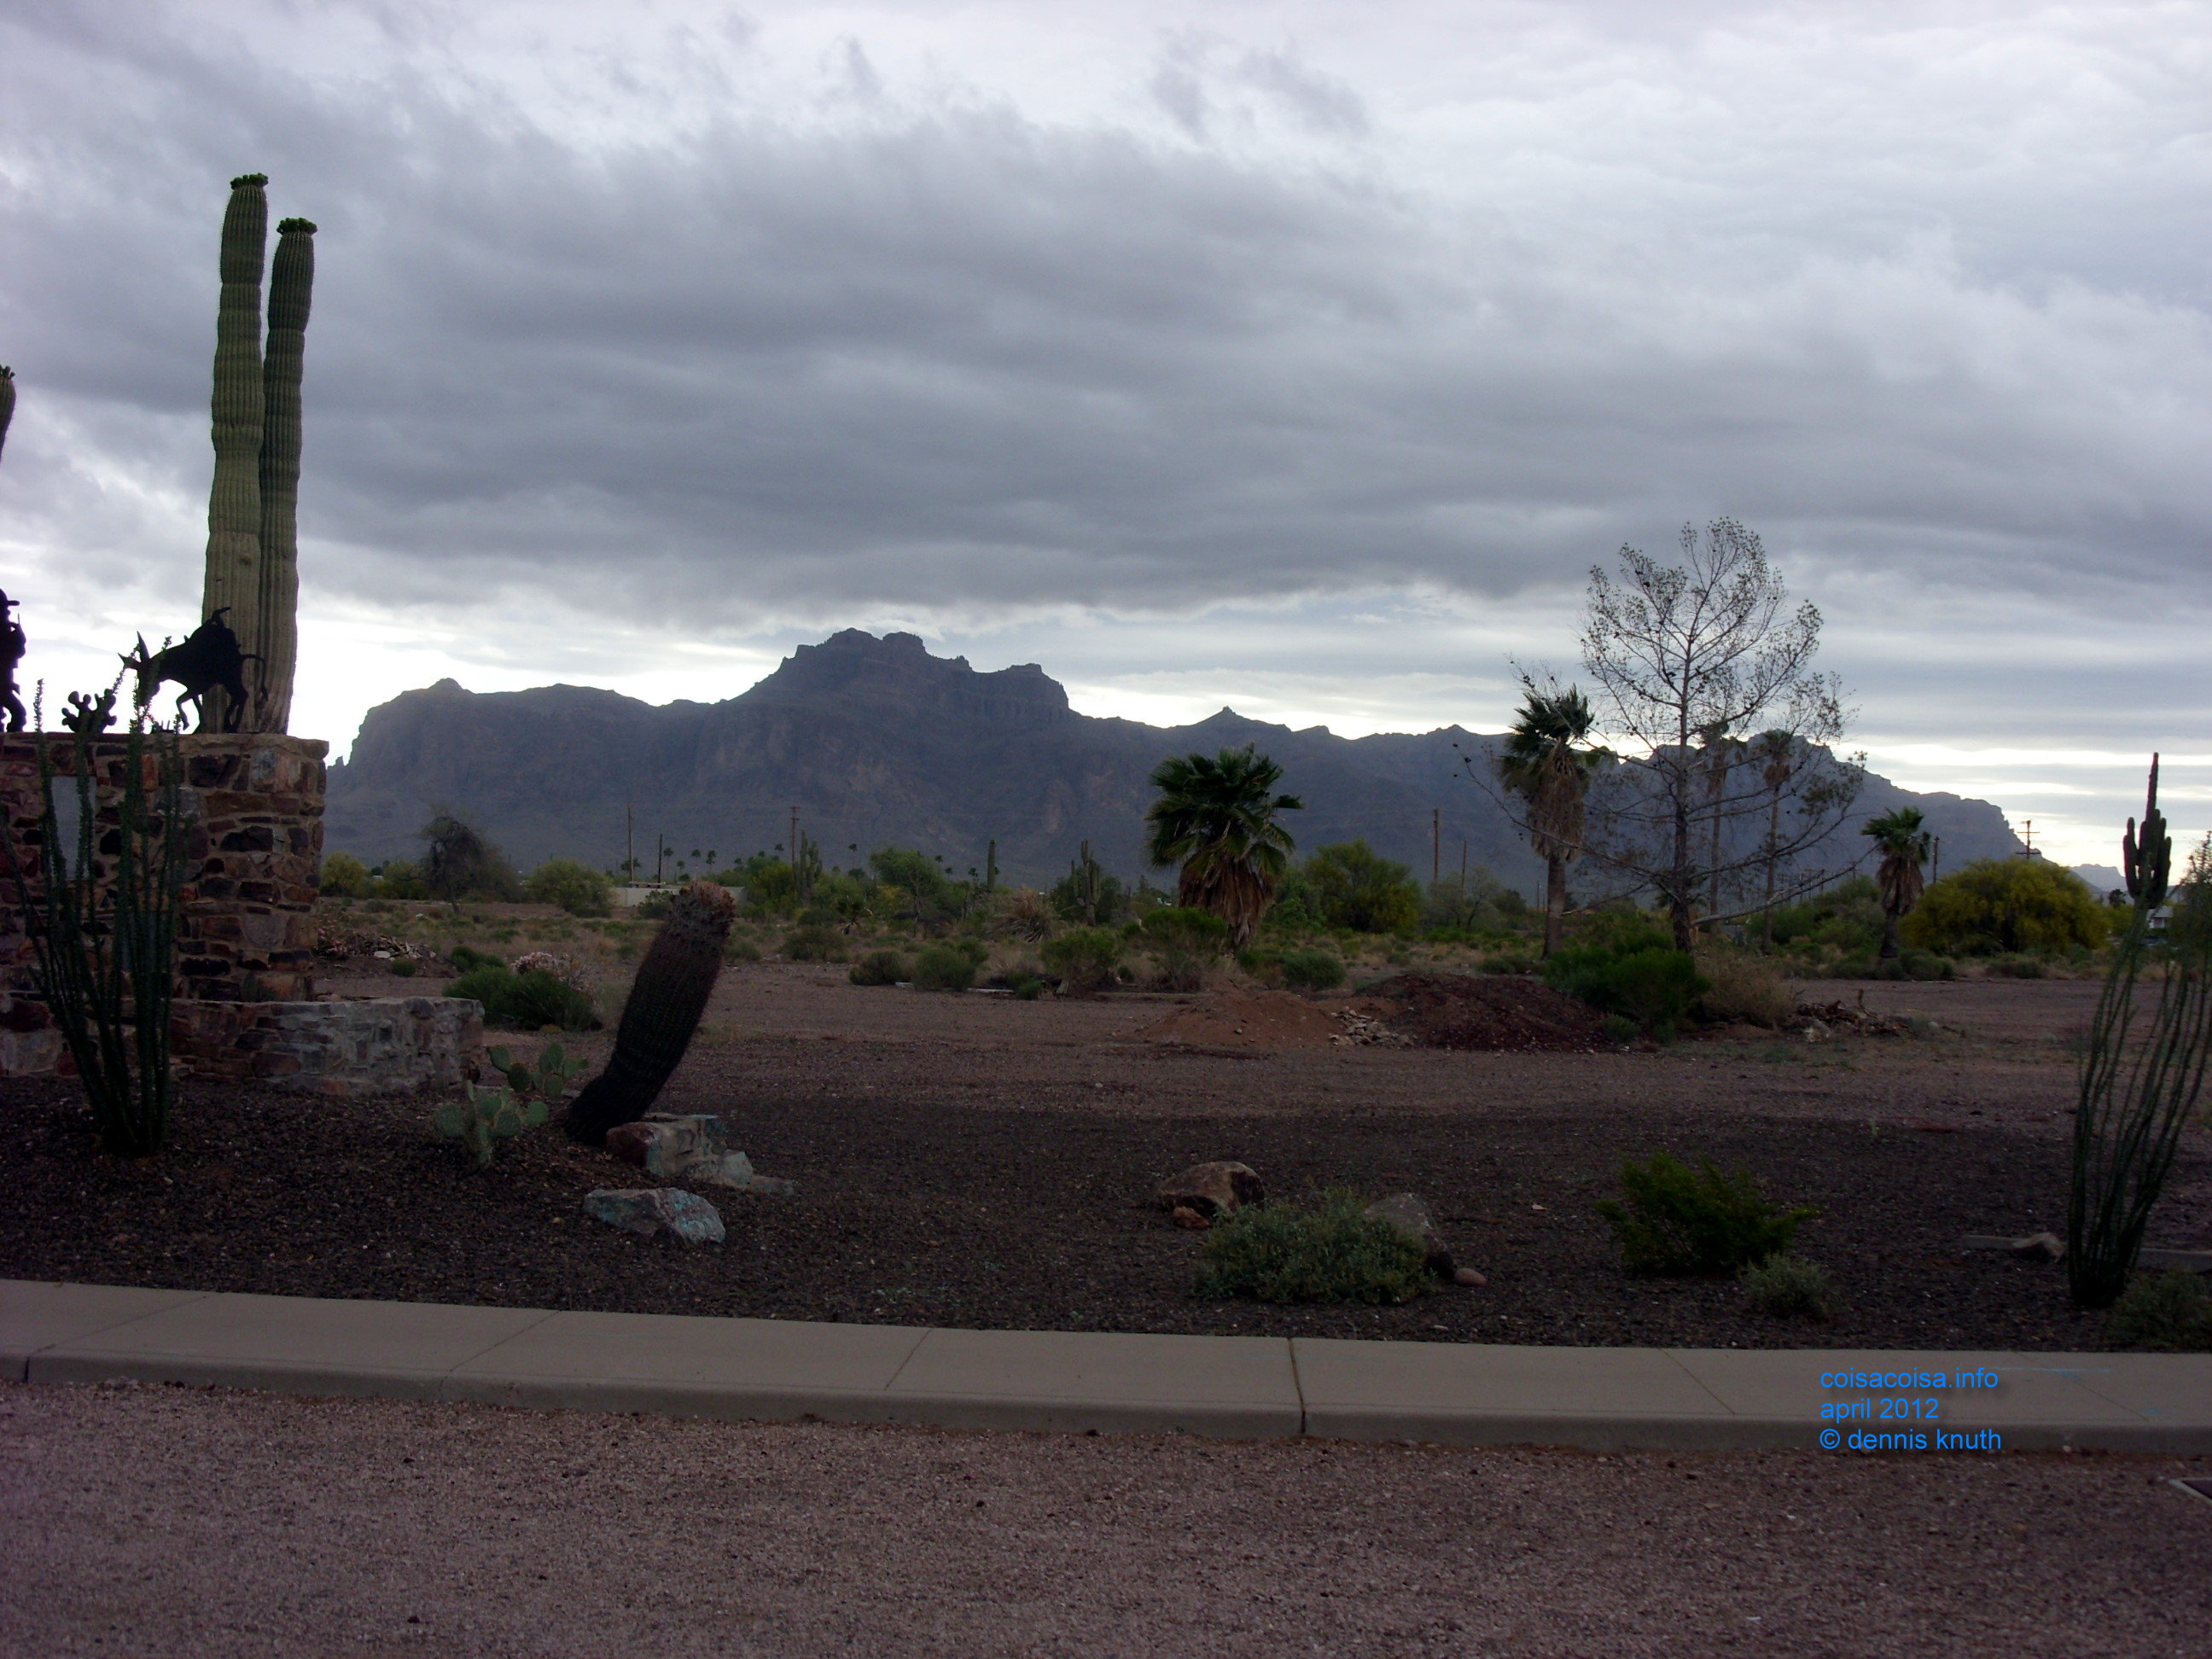 2012_04_26_a_superstition_mountain_0012.jpg (large)